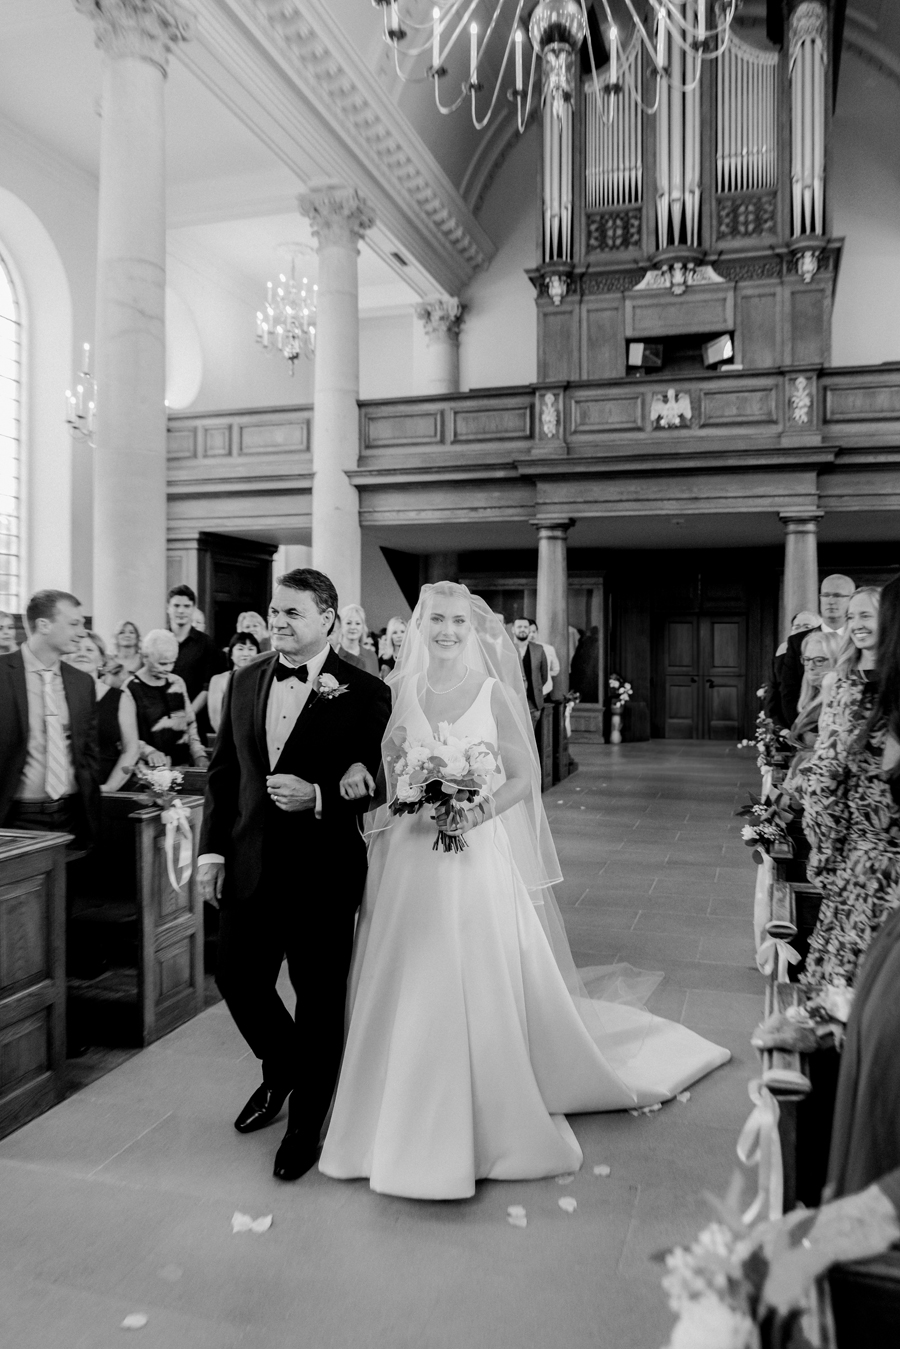 The bride and her father walk down the aisle in the Church of St. Mary, Aldermanbury at a Westminster College wedding by Love Tree Studios.